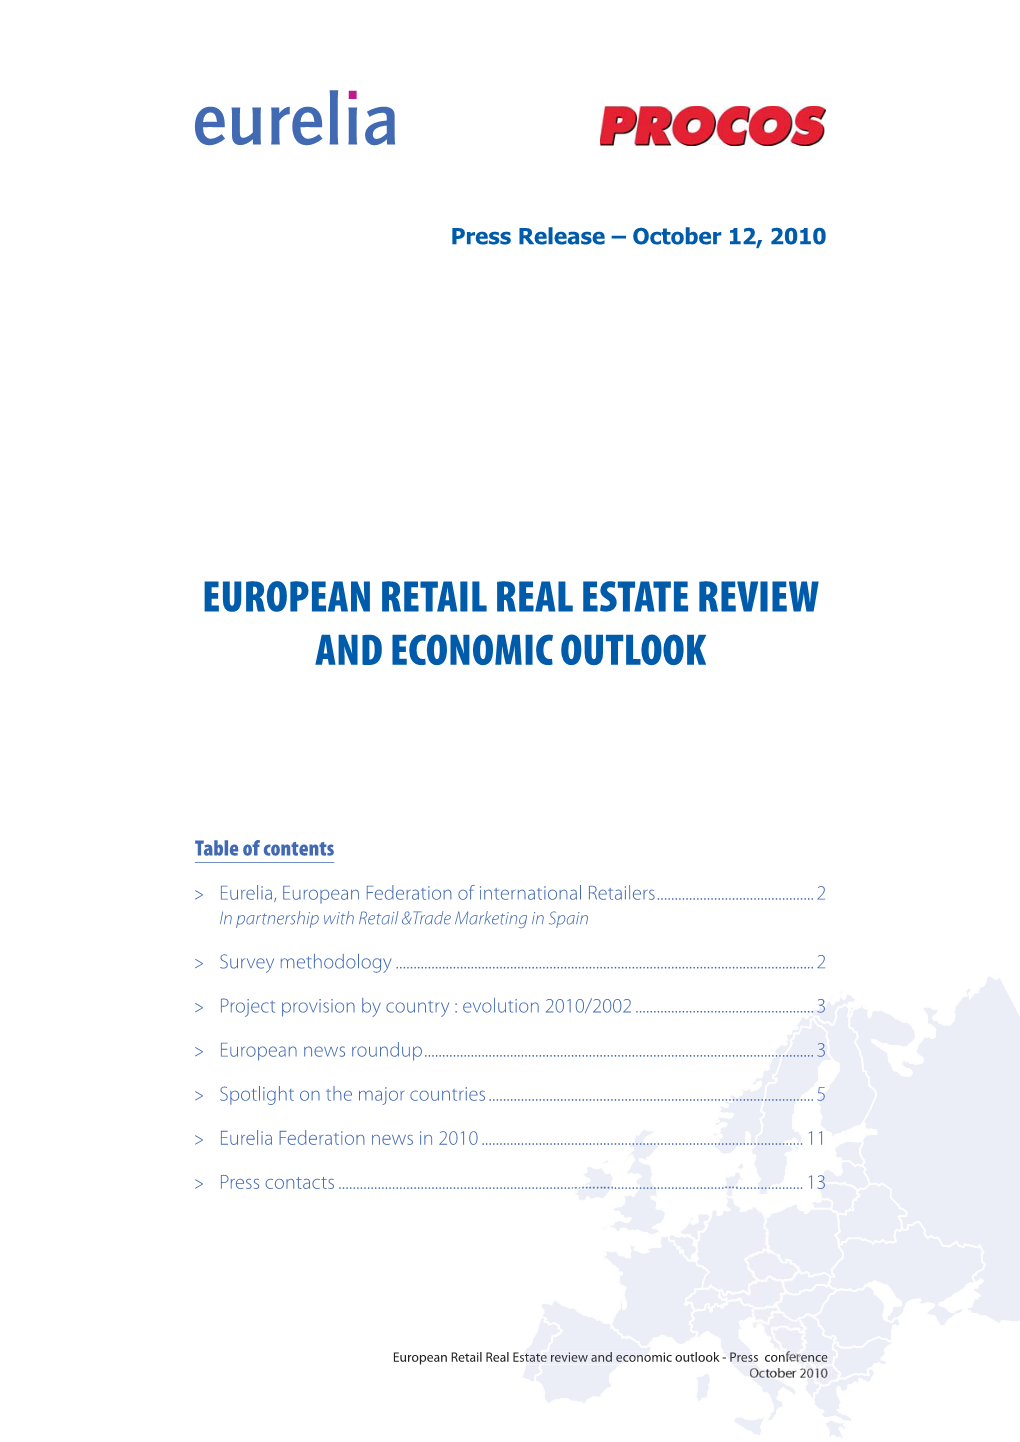 European Retail Real Estate Review and Economic Outlook